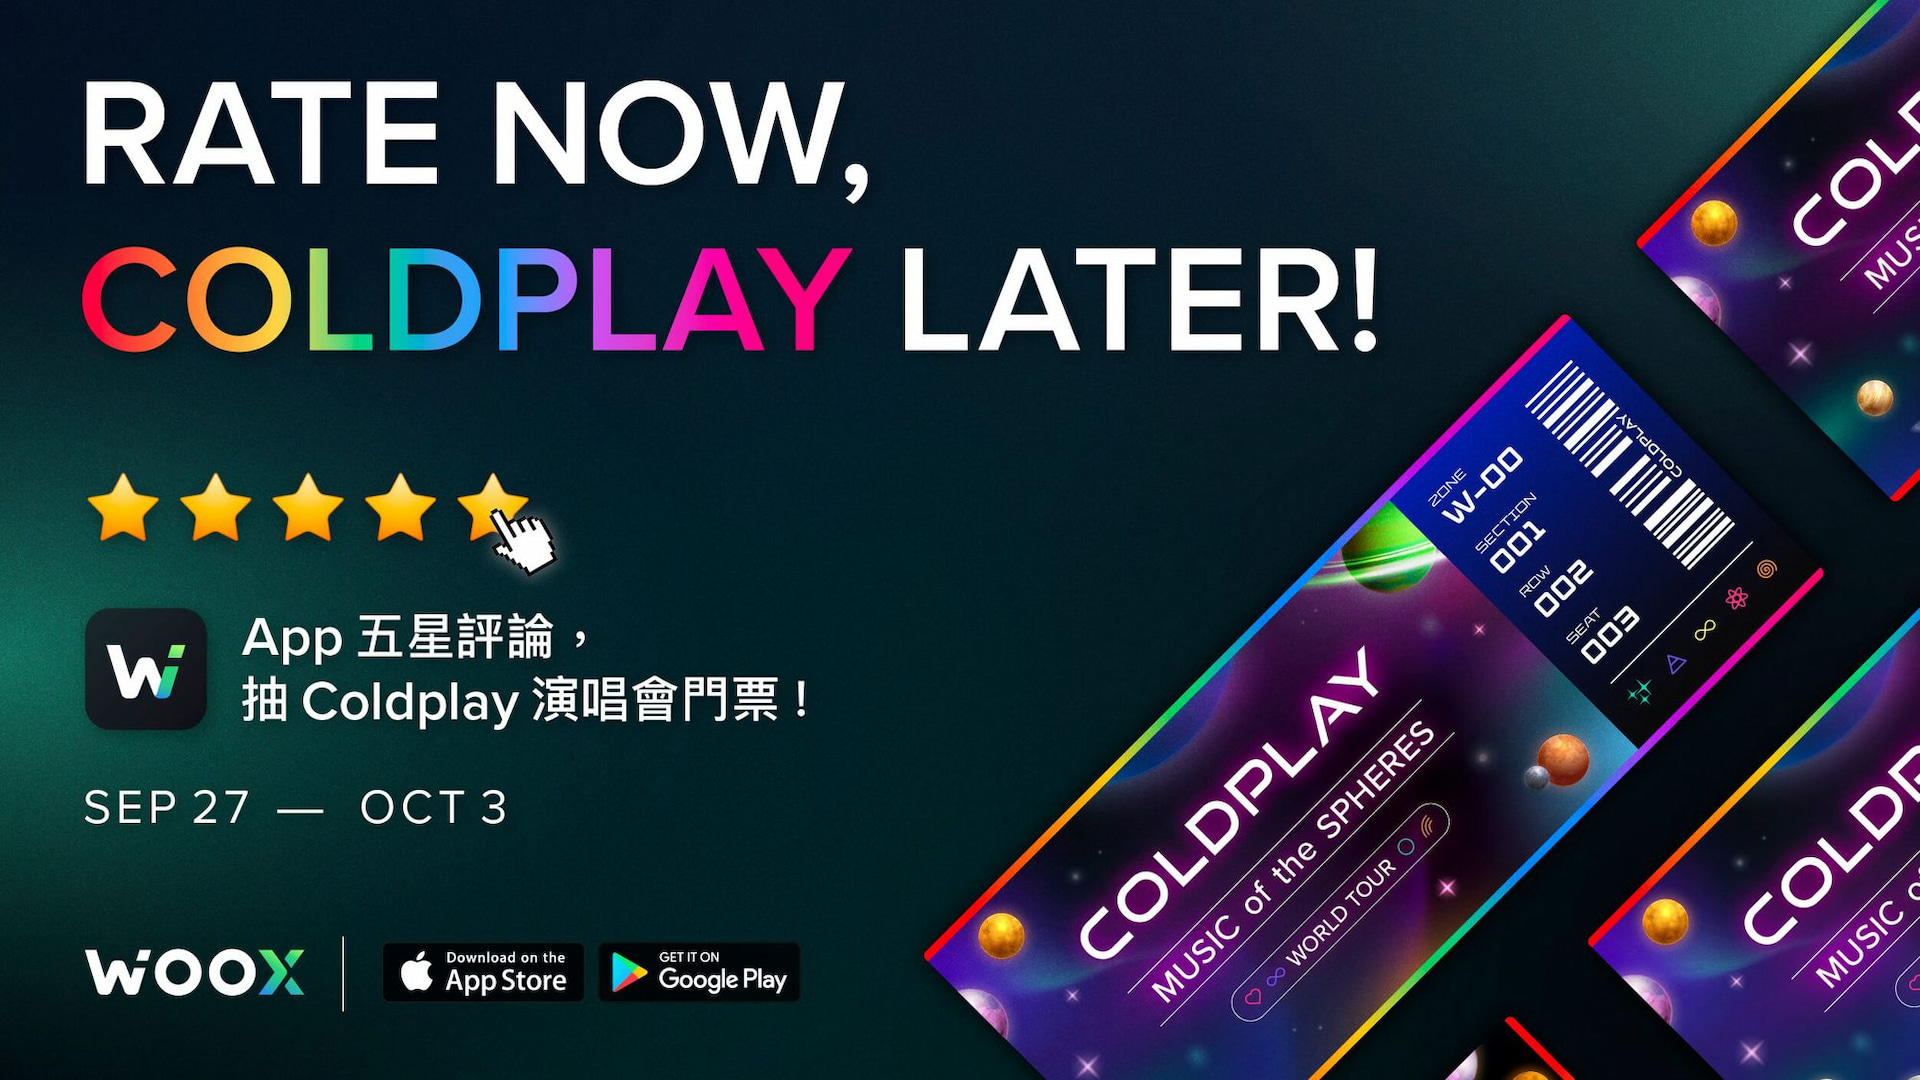 Rate Now, Coldplay Later! 活動公告